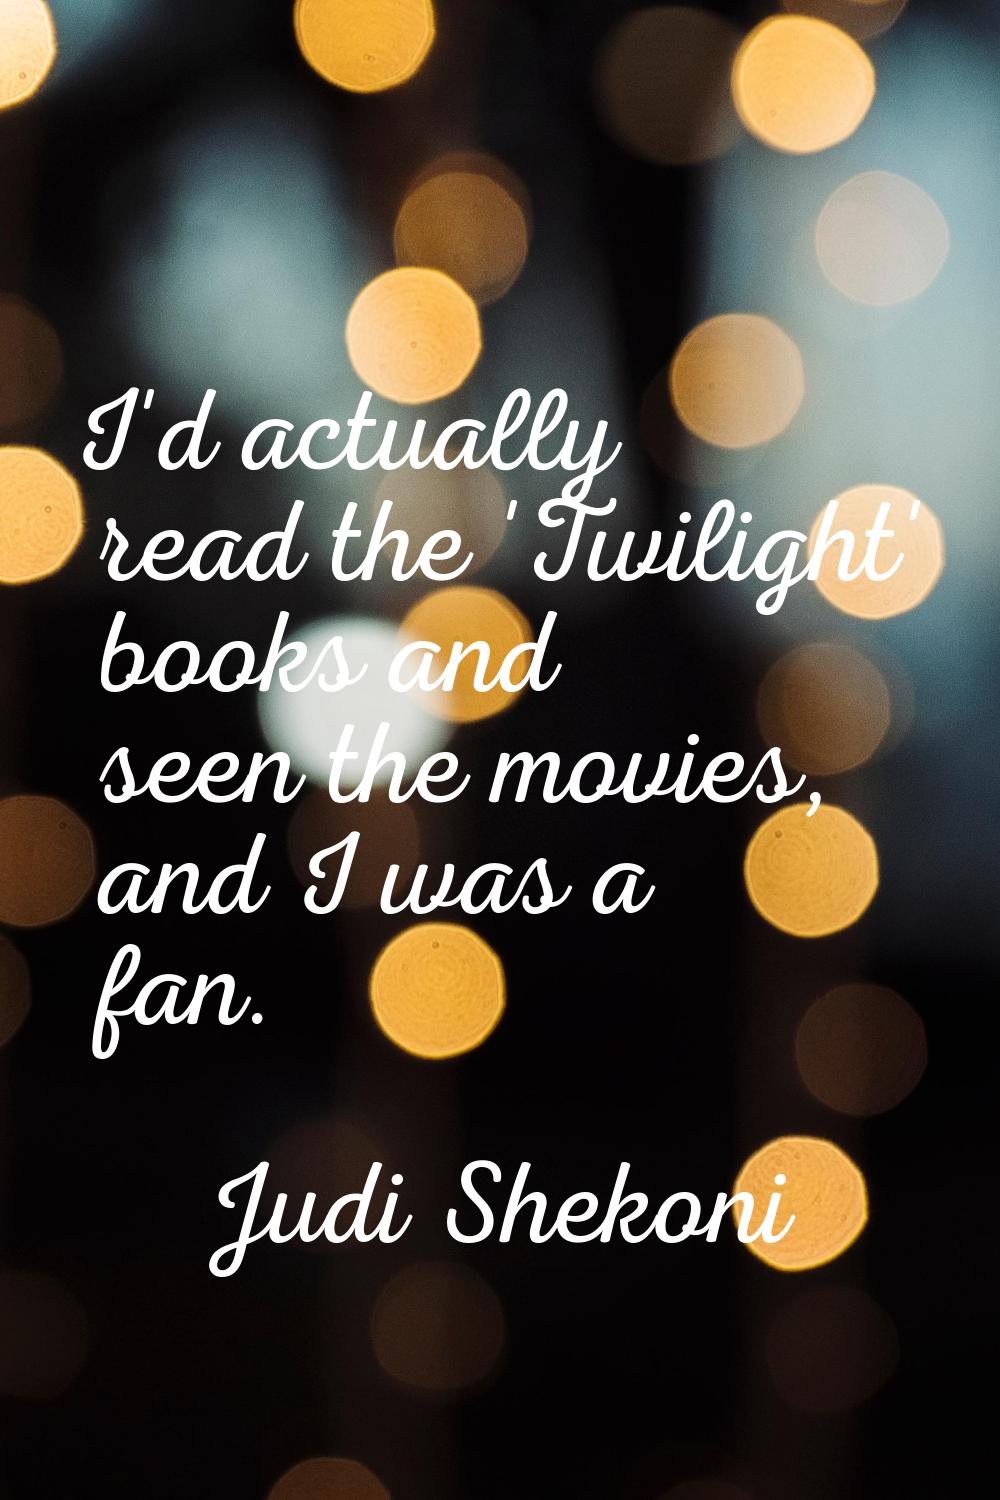 I'd actually read the 'Twilight' books and seen the movies, and I was a fan.